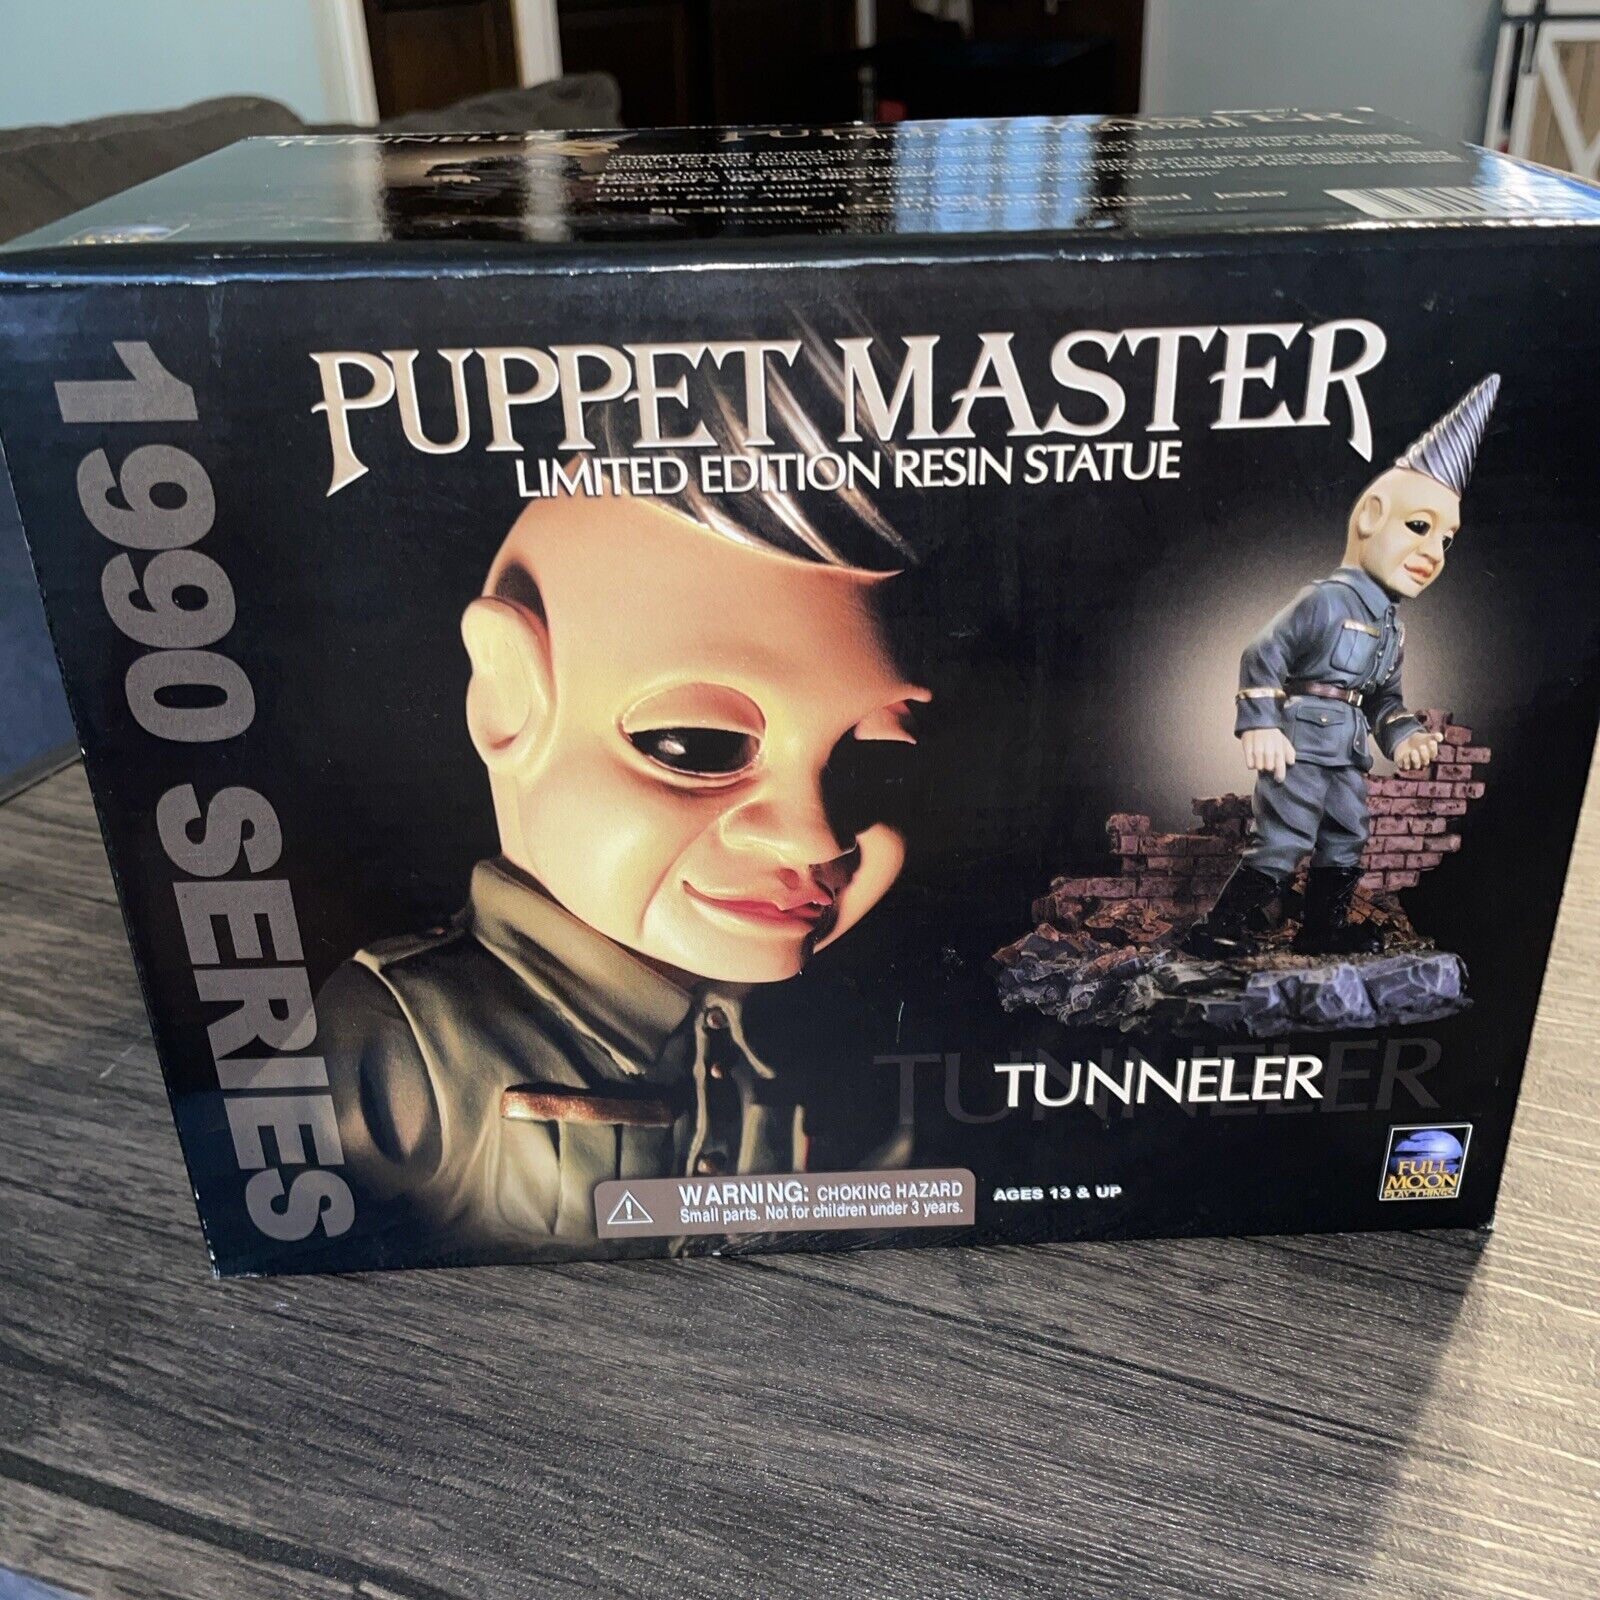 Puppet Master Limited Edition Resin Statue TUNNELER